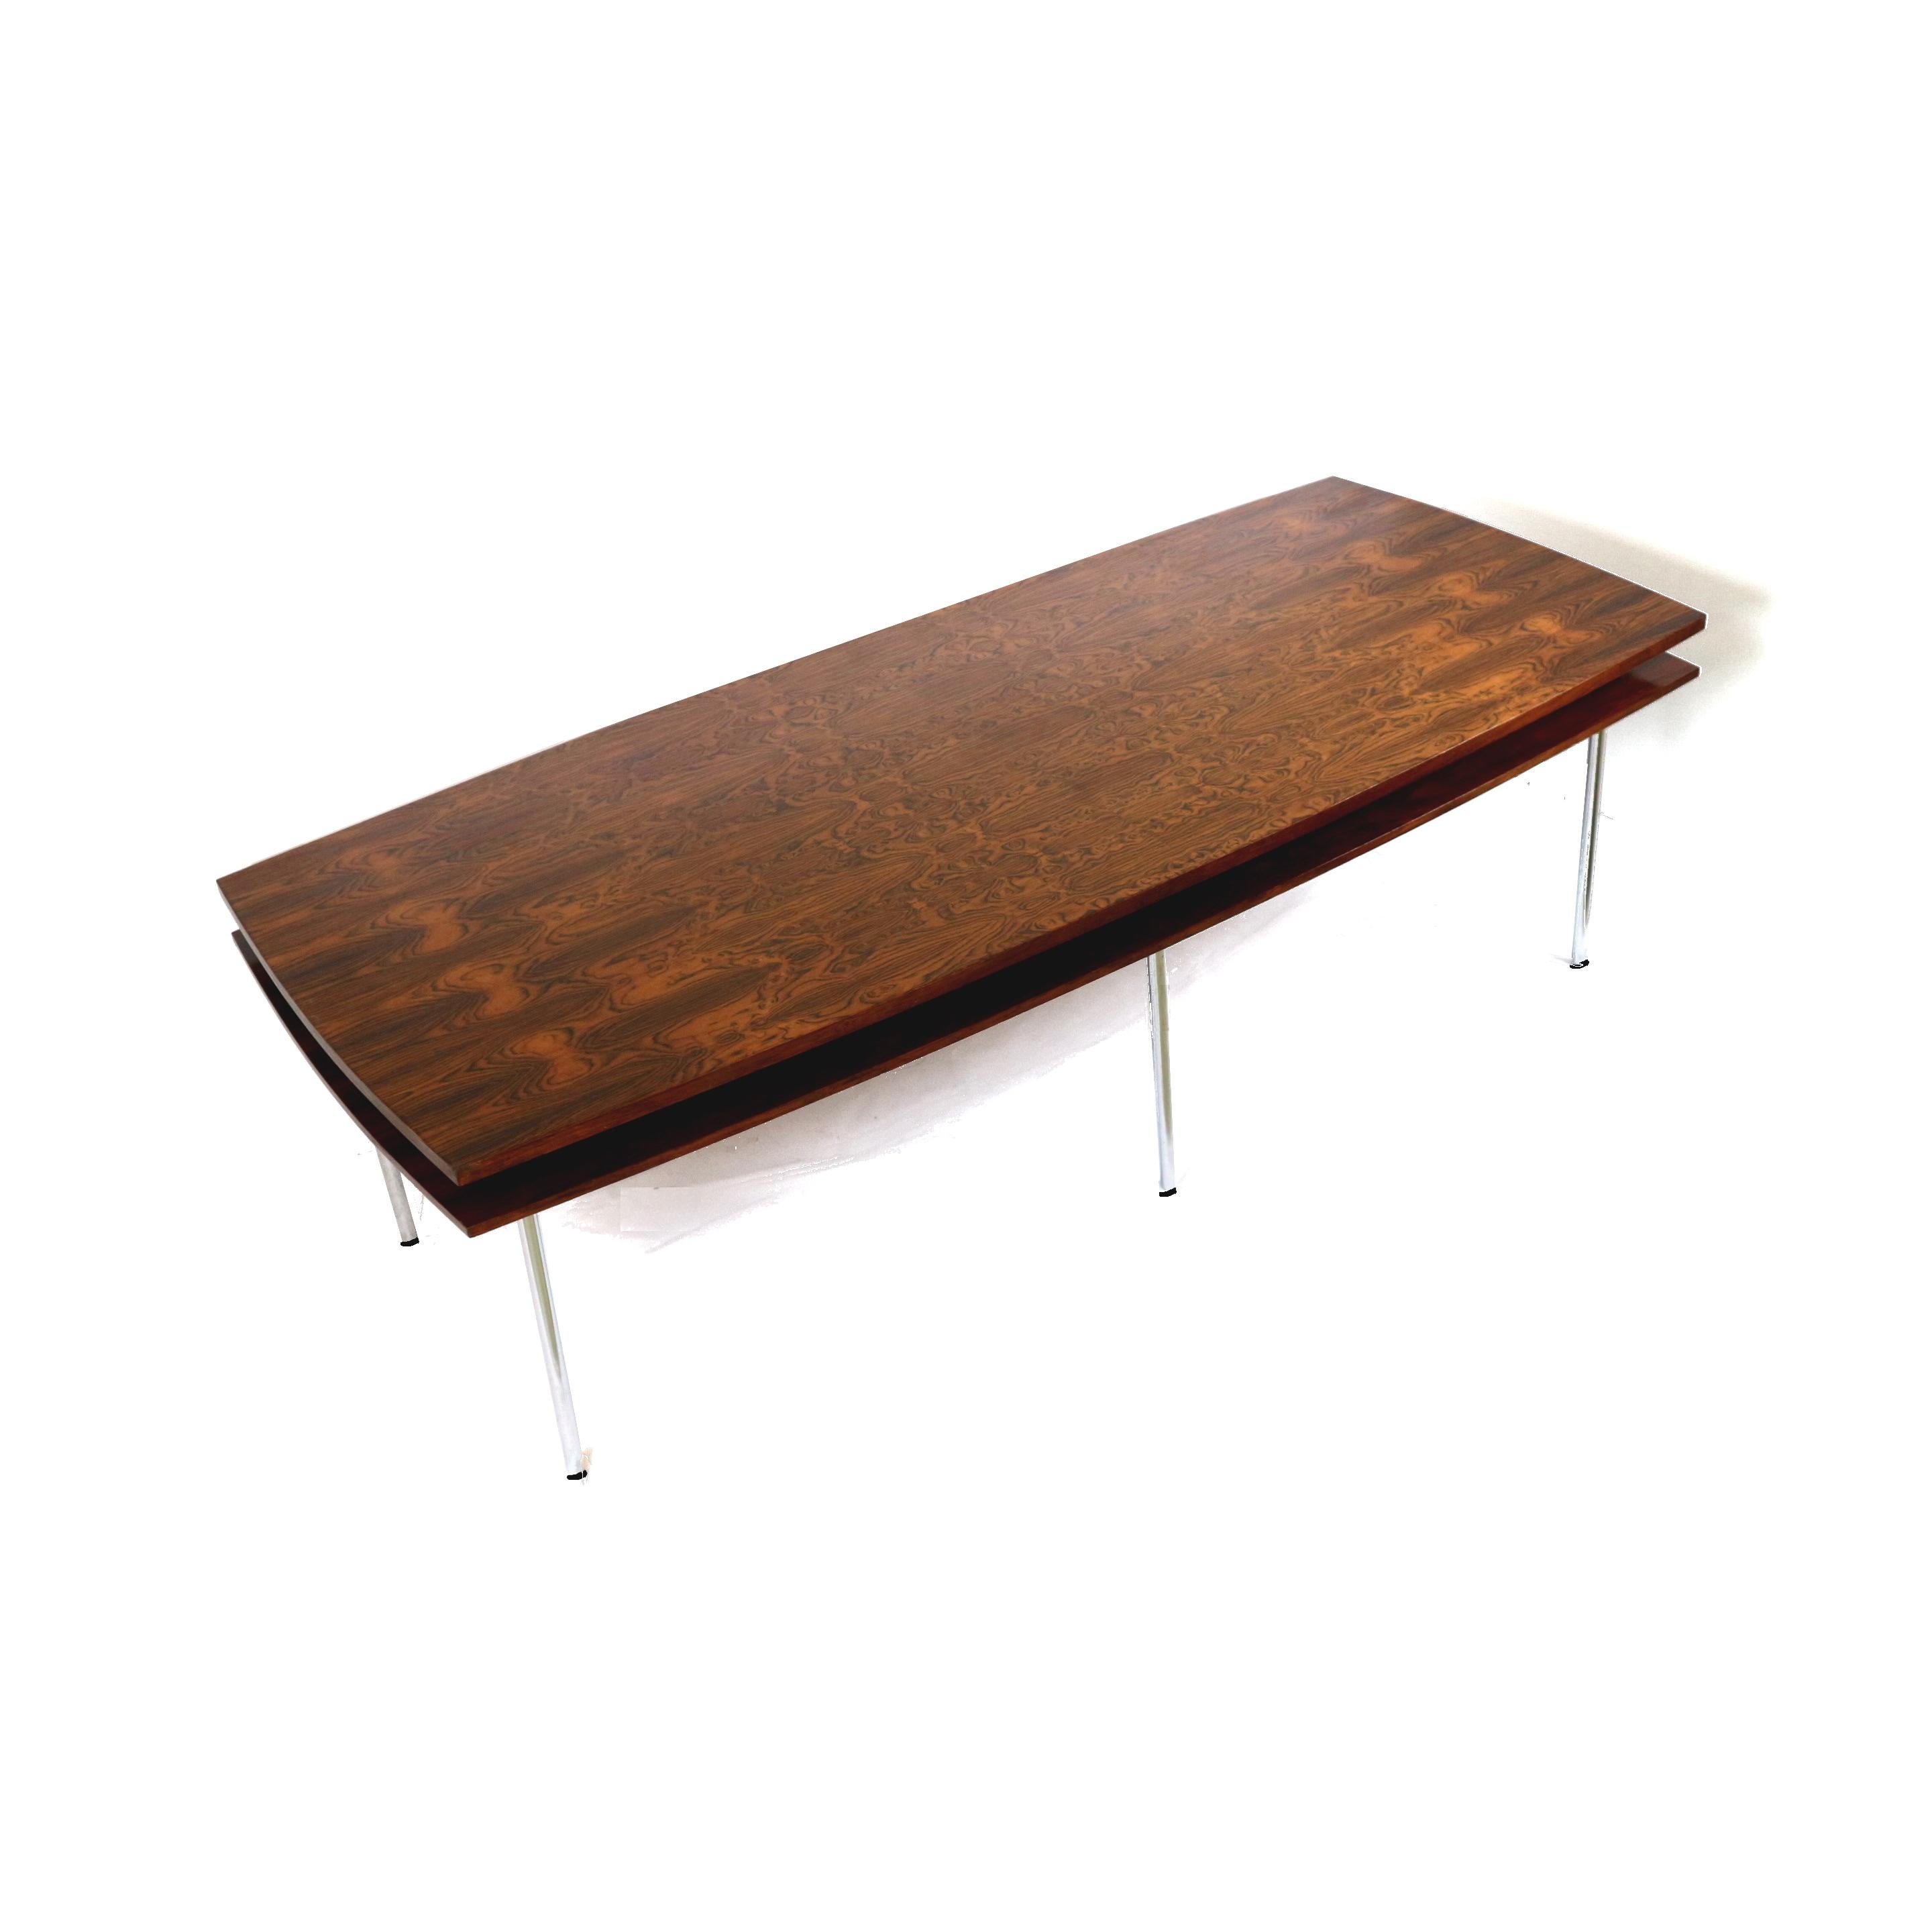 Large vintage rosewood conference table / dining table made in the 1960s.

Dimensions:
Length: 249 cm
Depth: 109.5 cm
Height: 74.4 cm

The table has signs of use appropriate to its age.